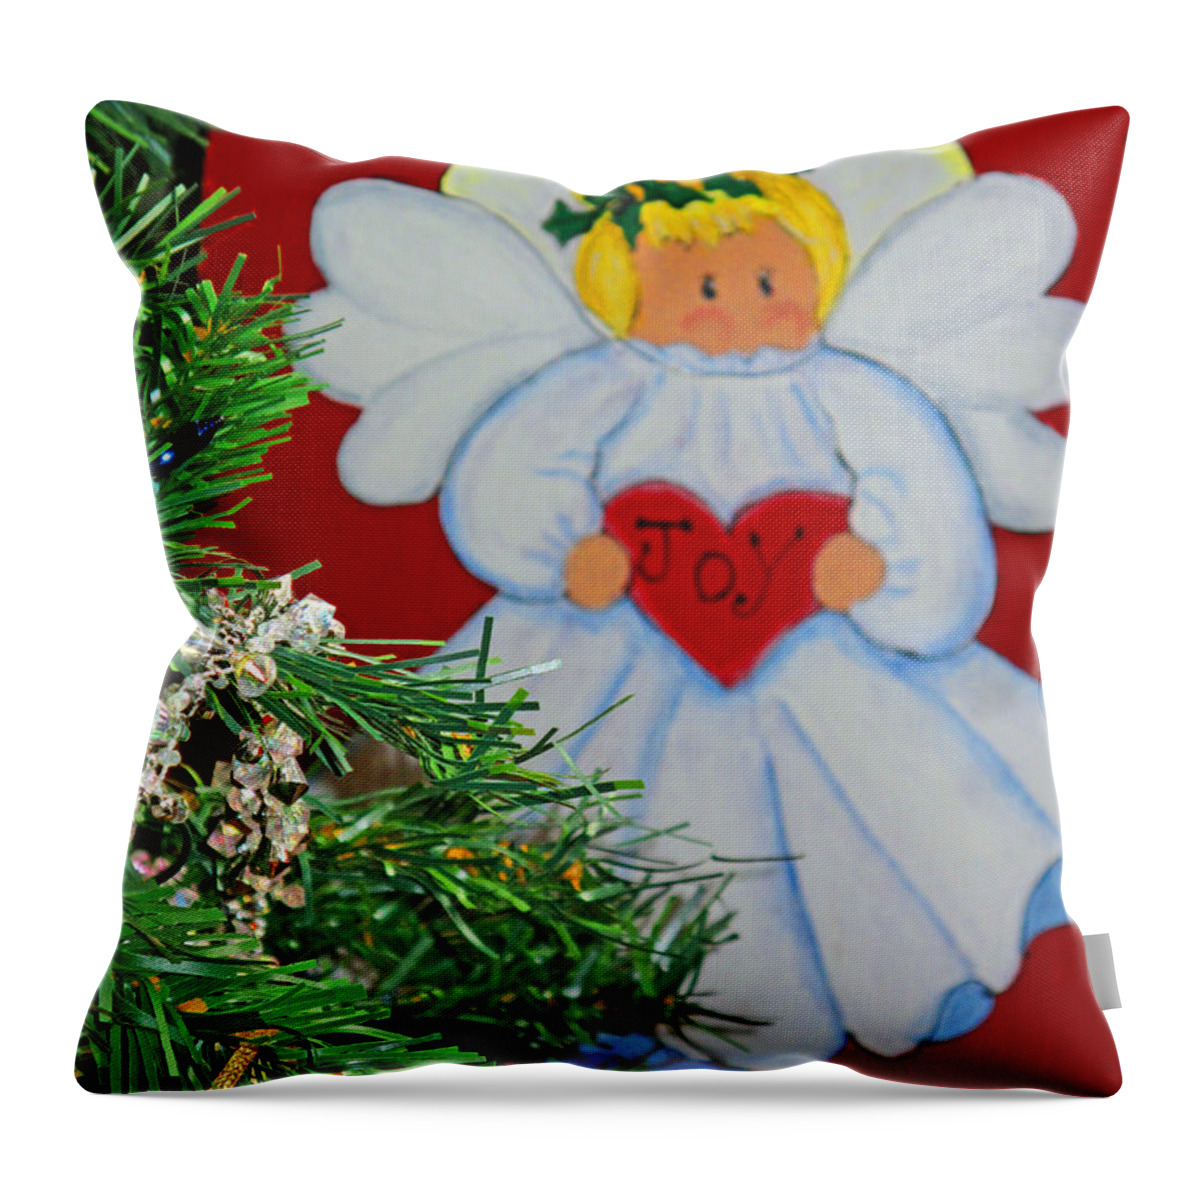 Angel Throw Pillow featuring the painting Joy by Barbara McDevitt